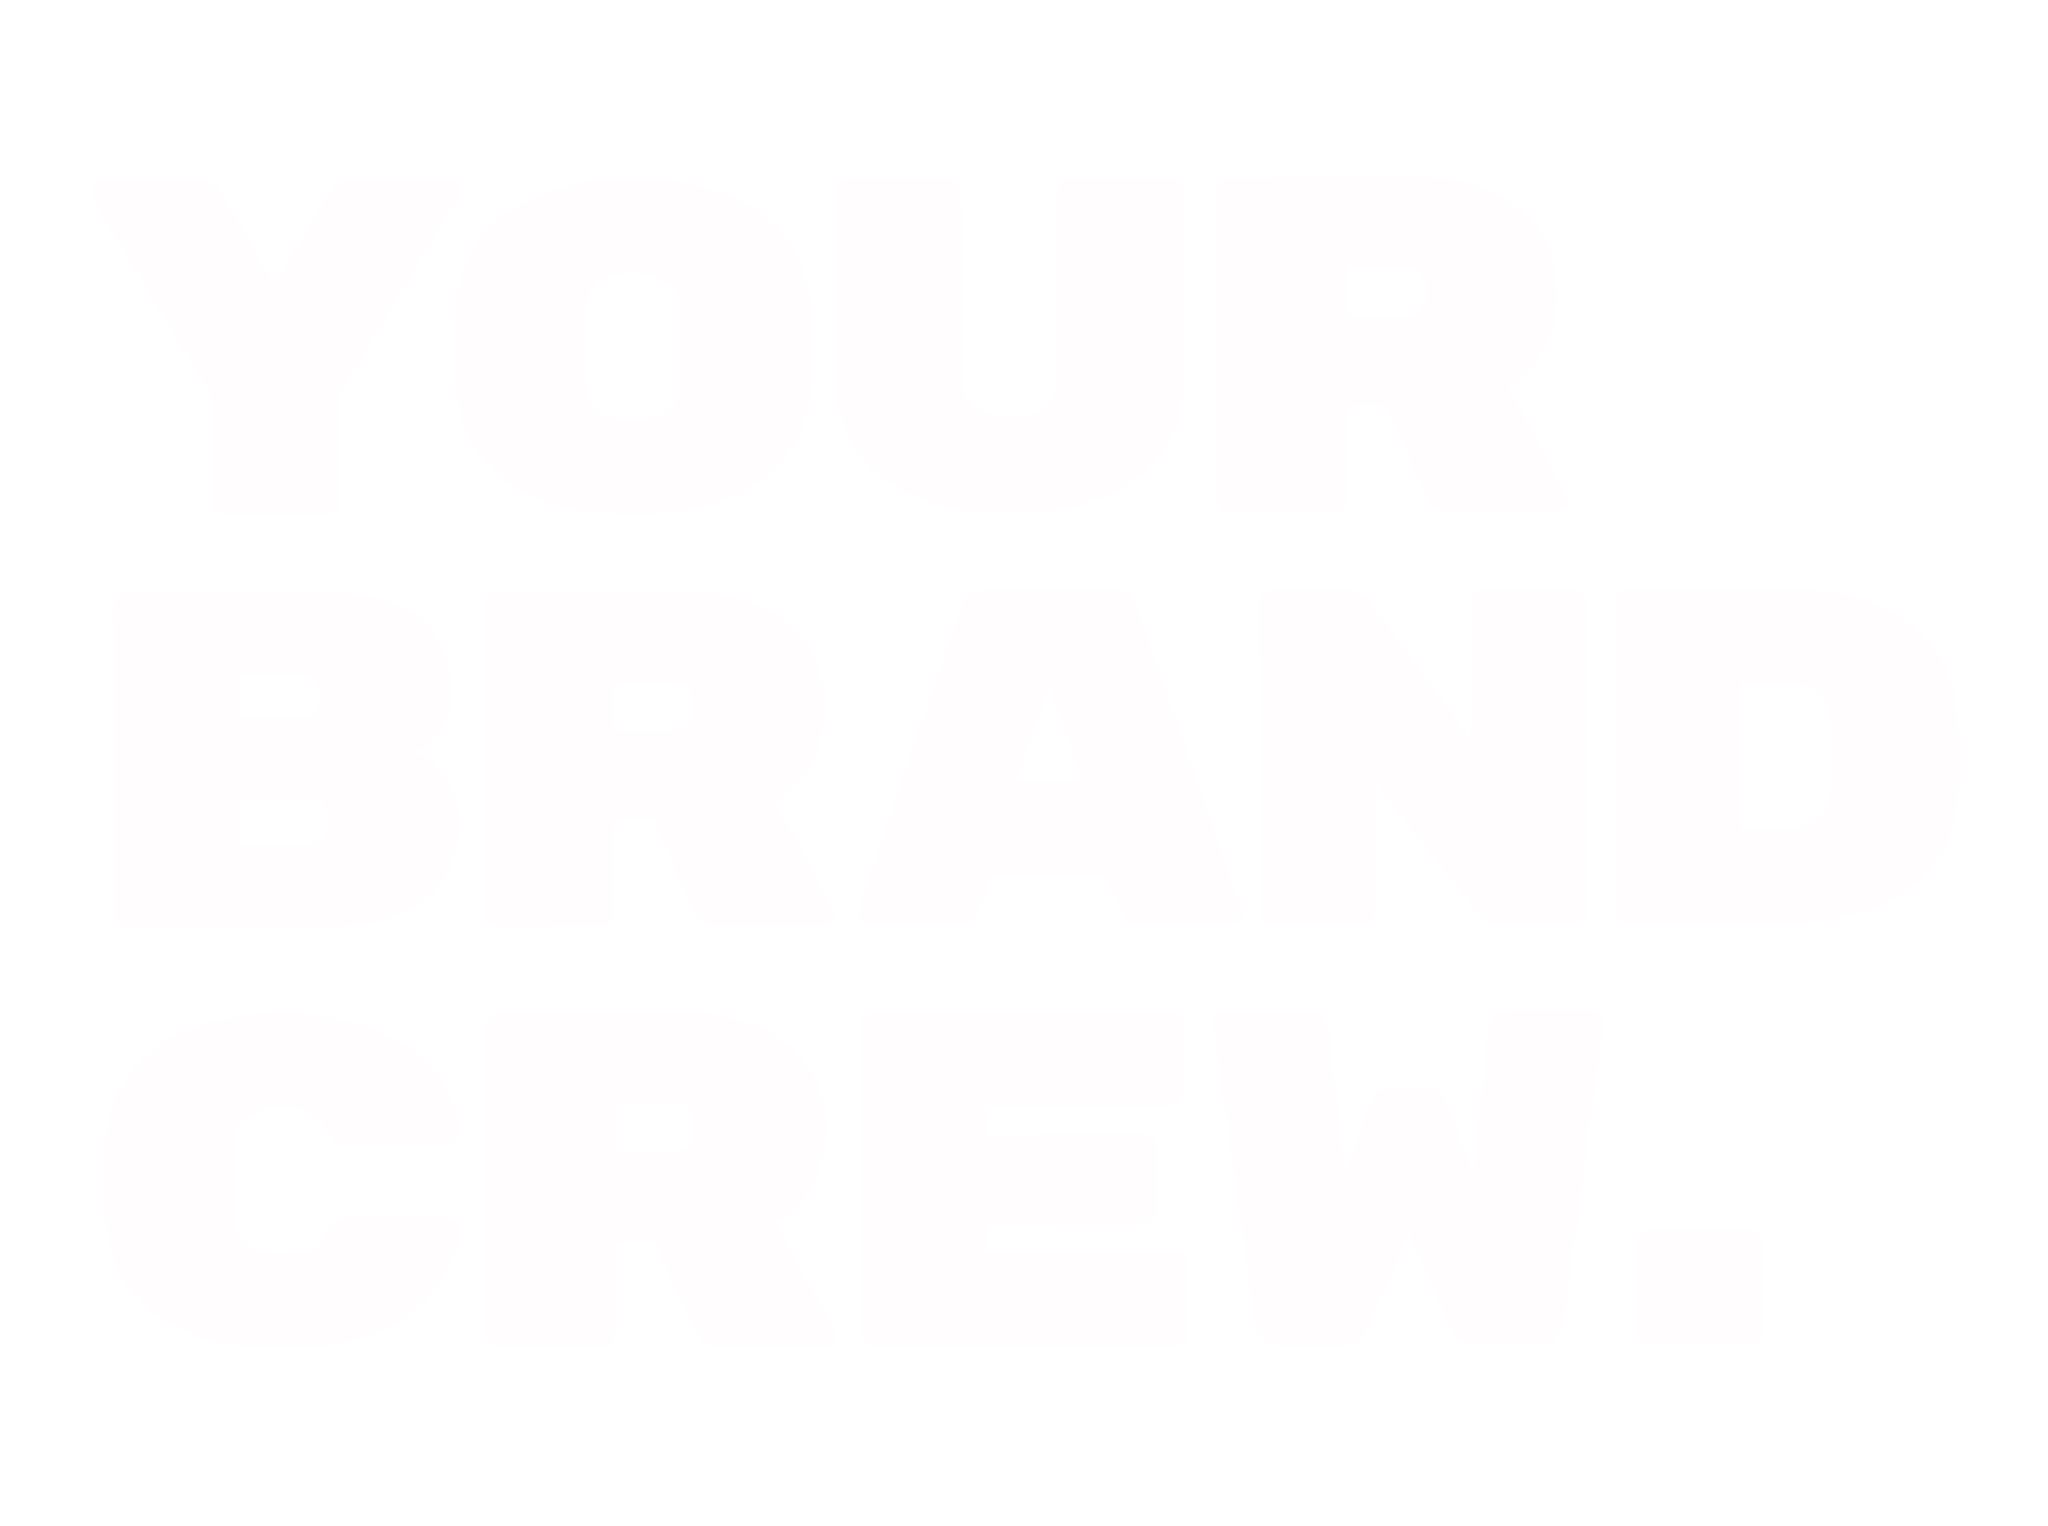 https://maroochy.org/wp-content/uploads/2022/03/Your-Brand-Crew-logo-white.png